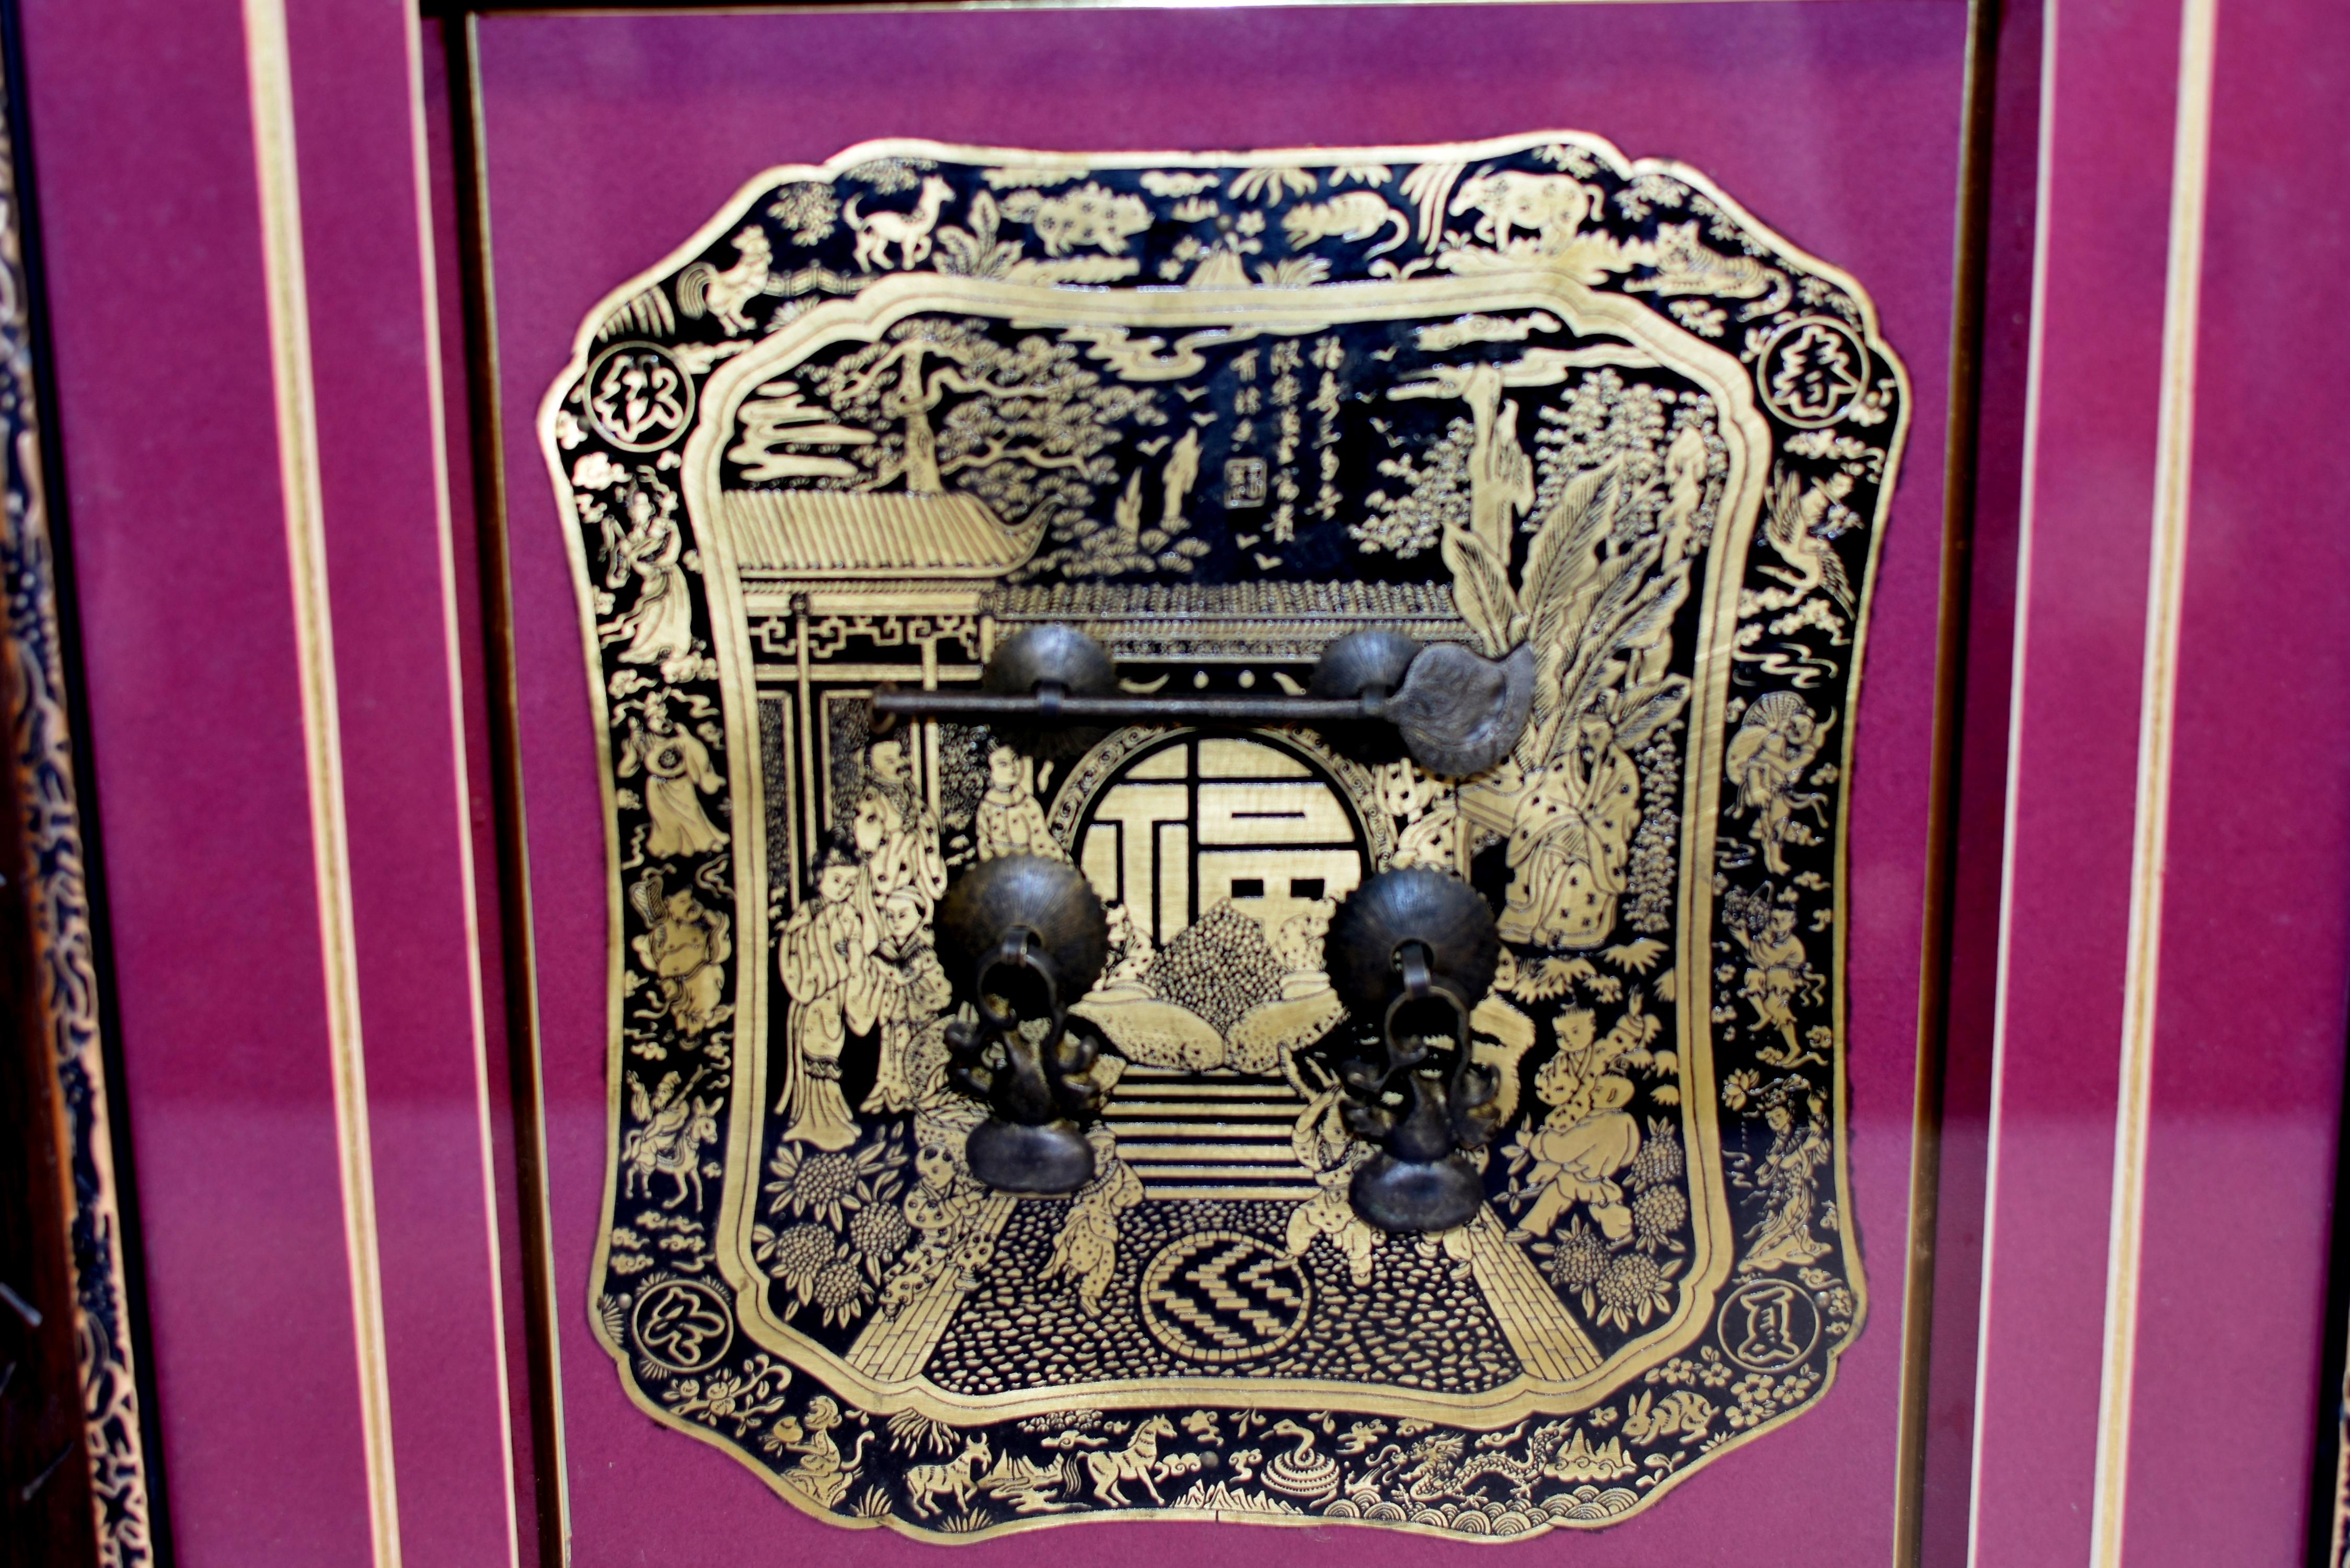 A beautiful vintage shadowbox of solid brass hardware. The exceptionally large door plate is prominently featured, displaying great details of a finely engraved good fortune theme. The main scene is a family compound, with the patriarch on the right